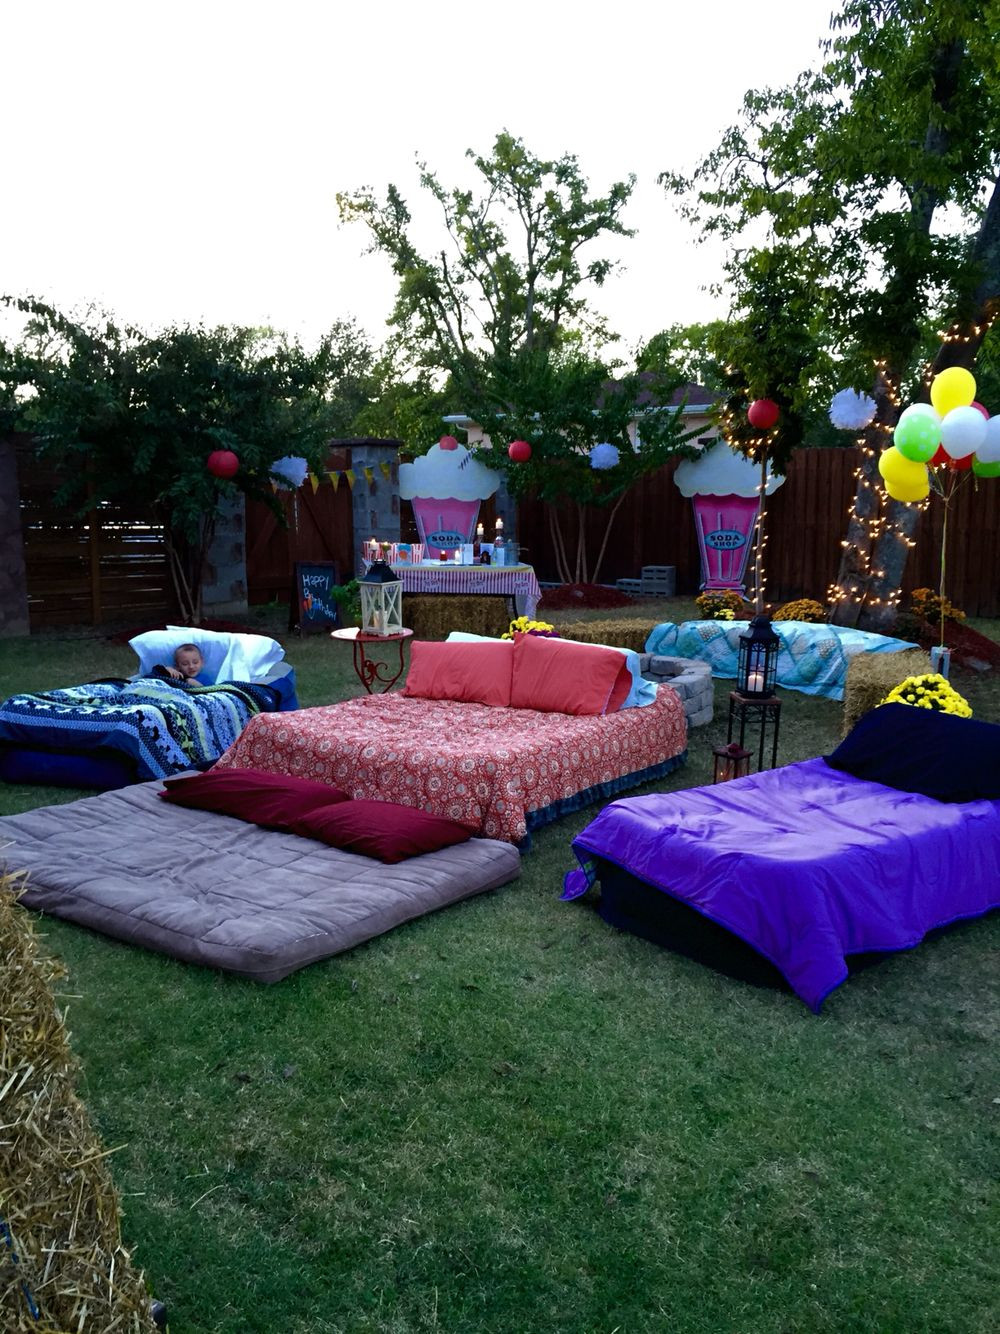 Backyard Party Ideas For Teenagers
 Air mattresses for movie night outside